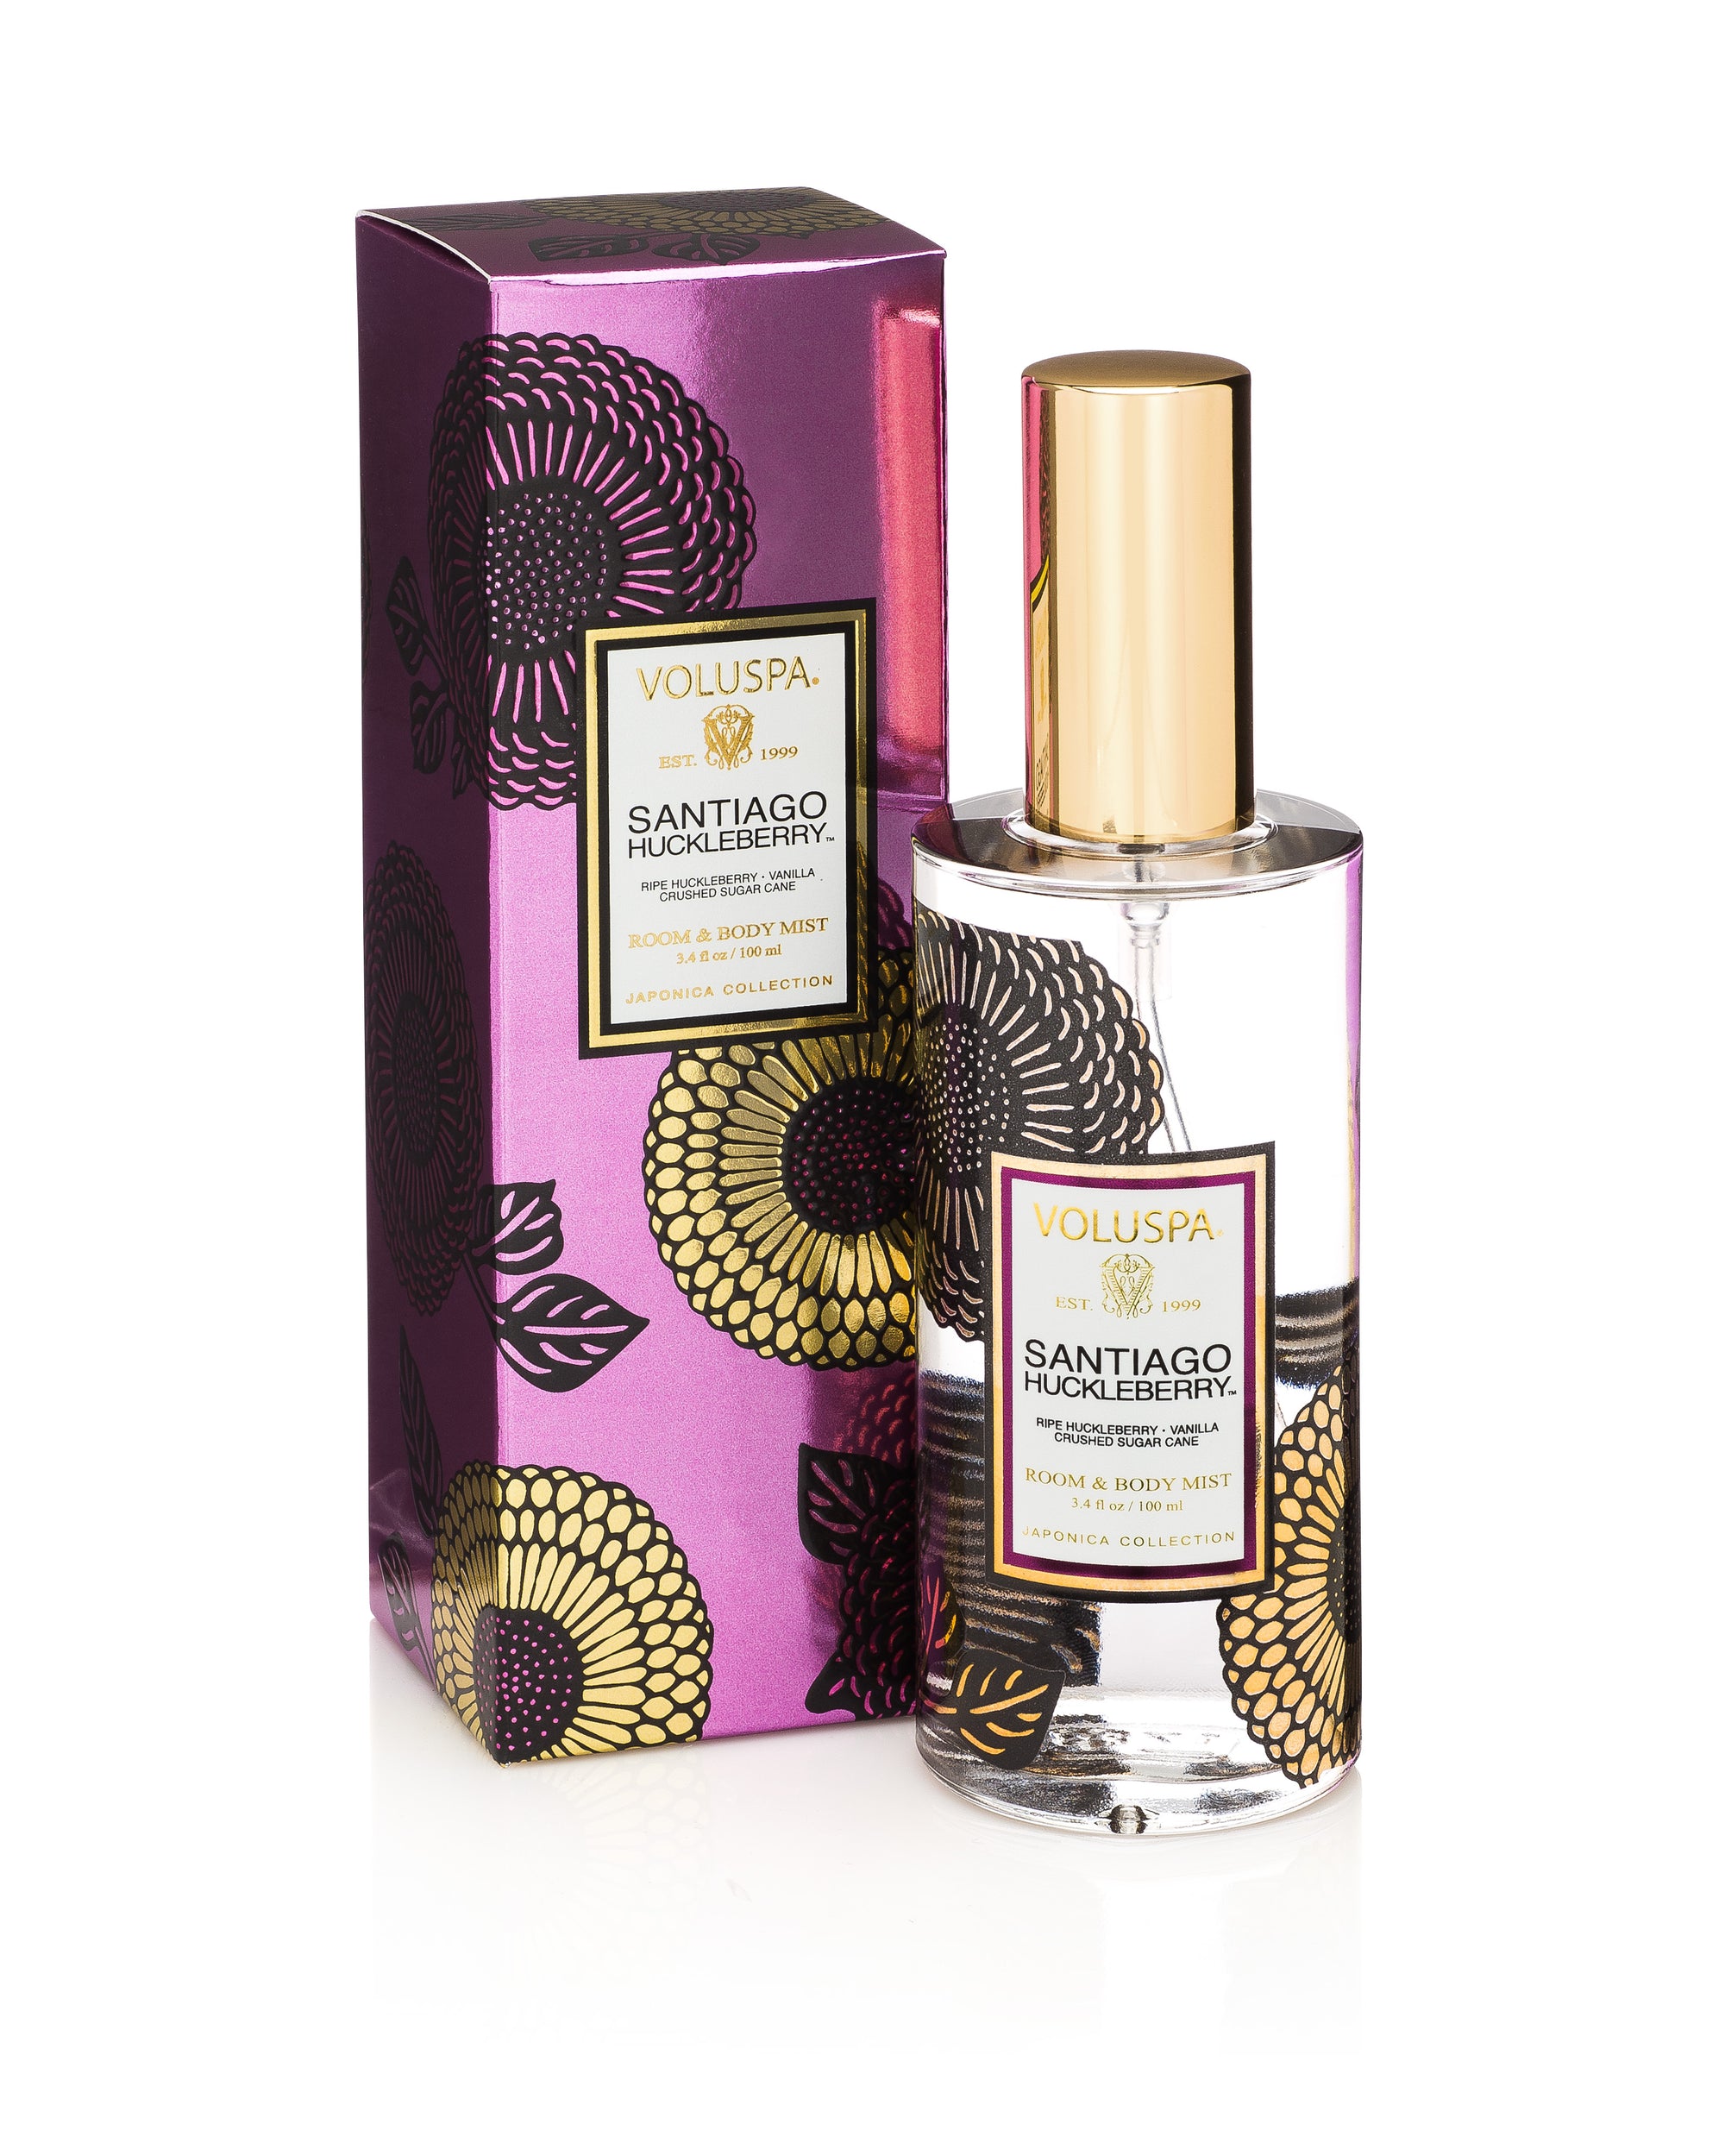 Japonica Limited Santiago Huckleberry Room and Body Mist